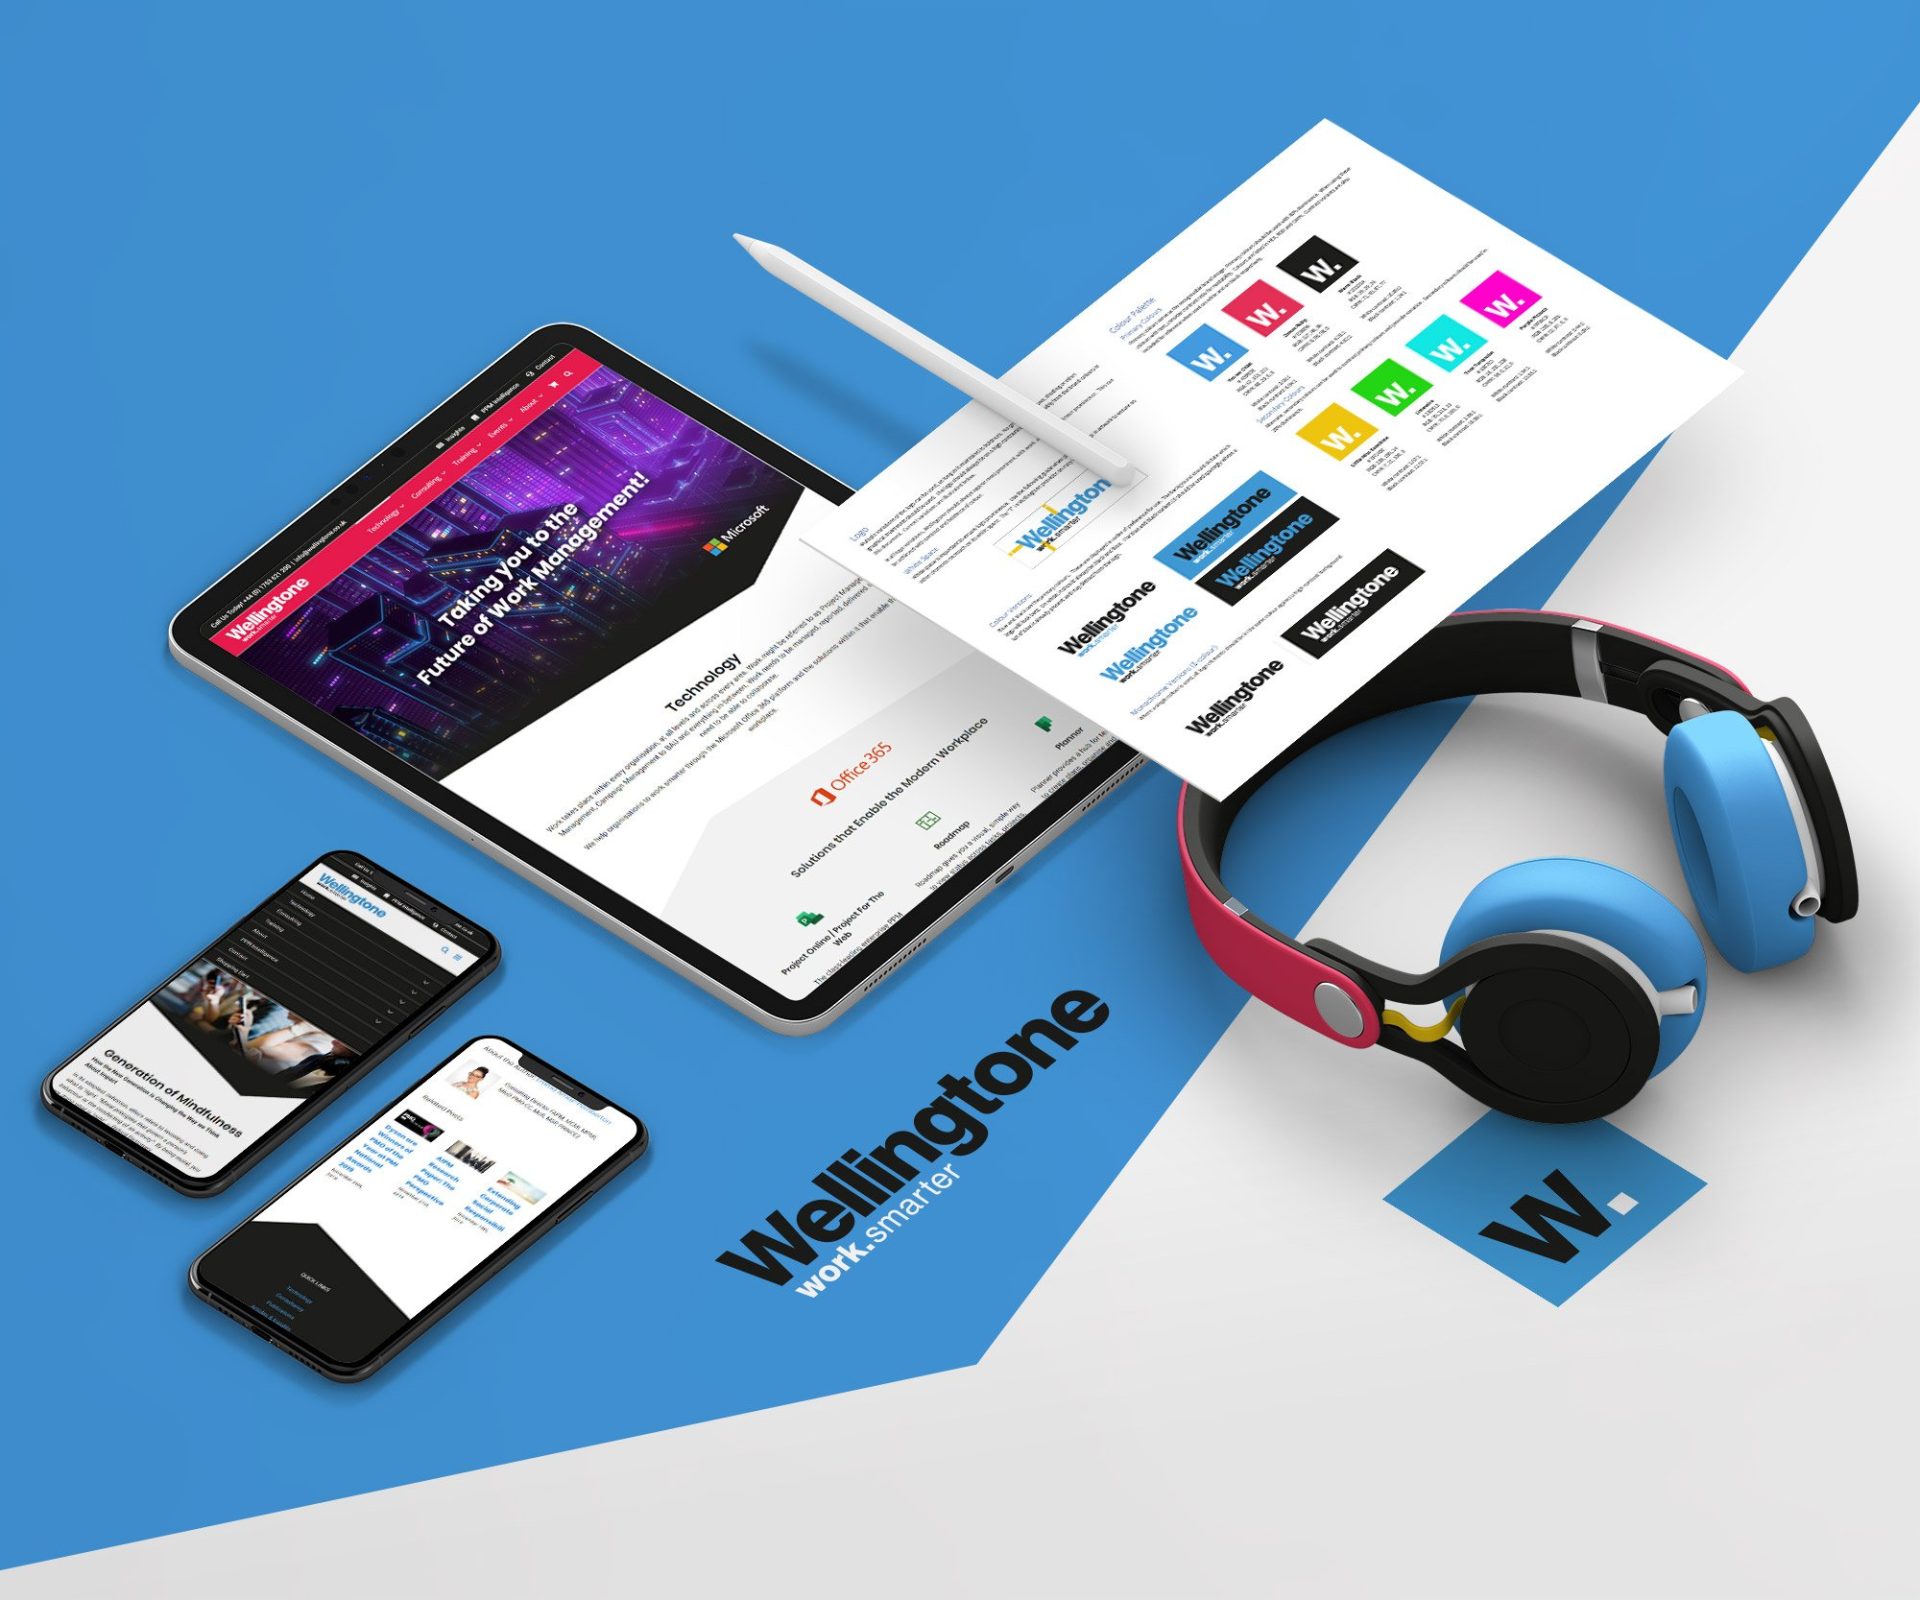 Wellingtone website - tablet, mobile devices and headphones